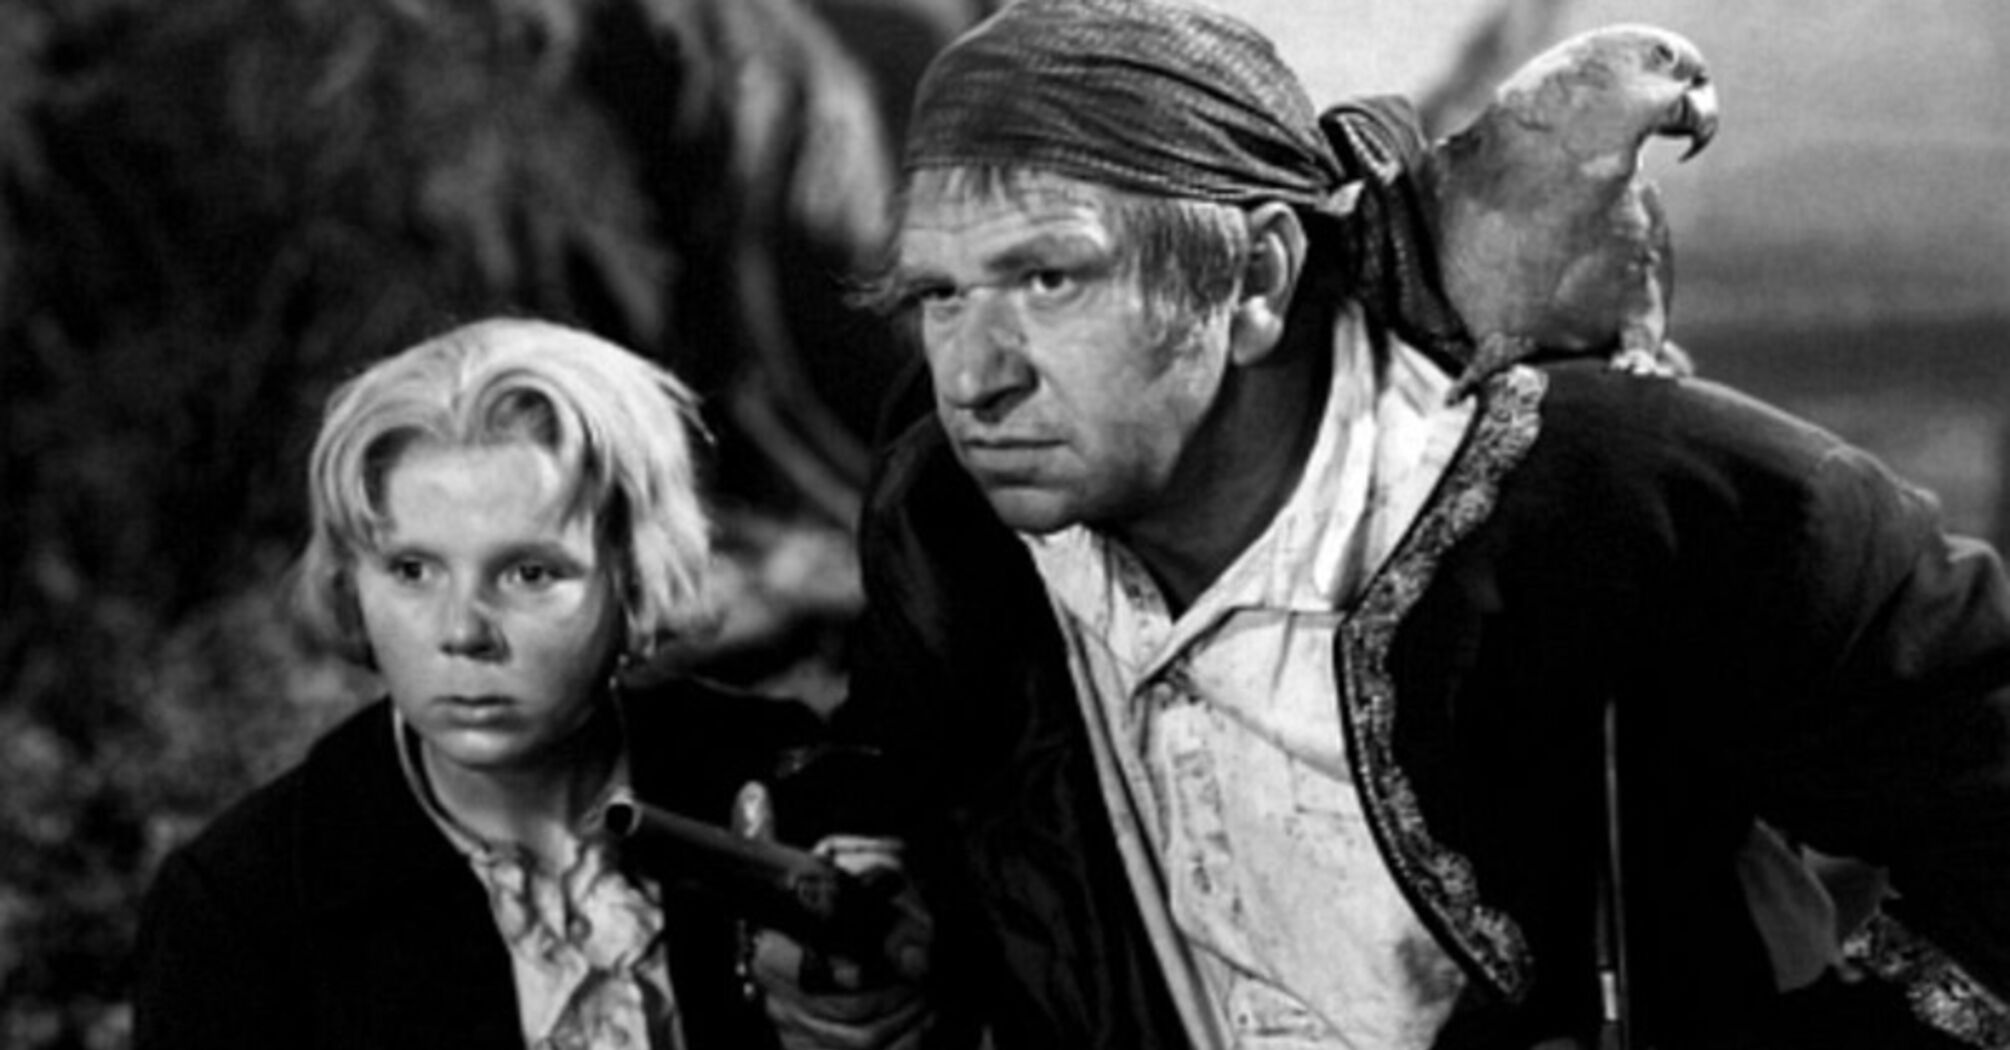 Top 10 best pirate movies and cartoons of all time